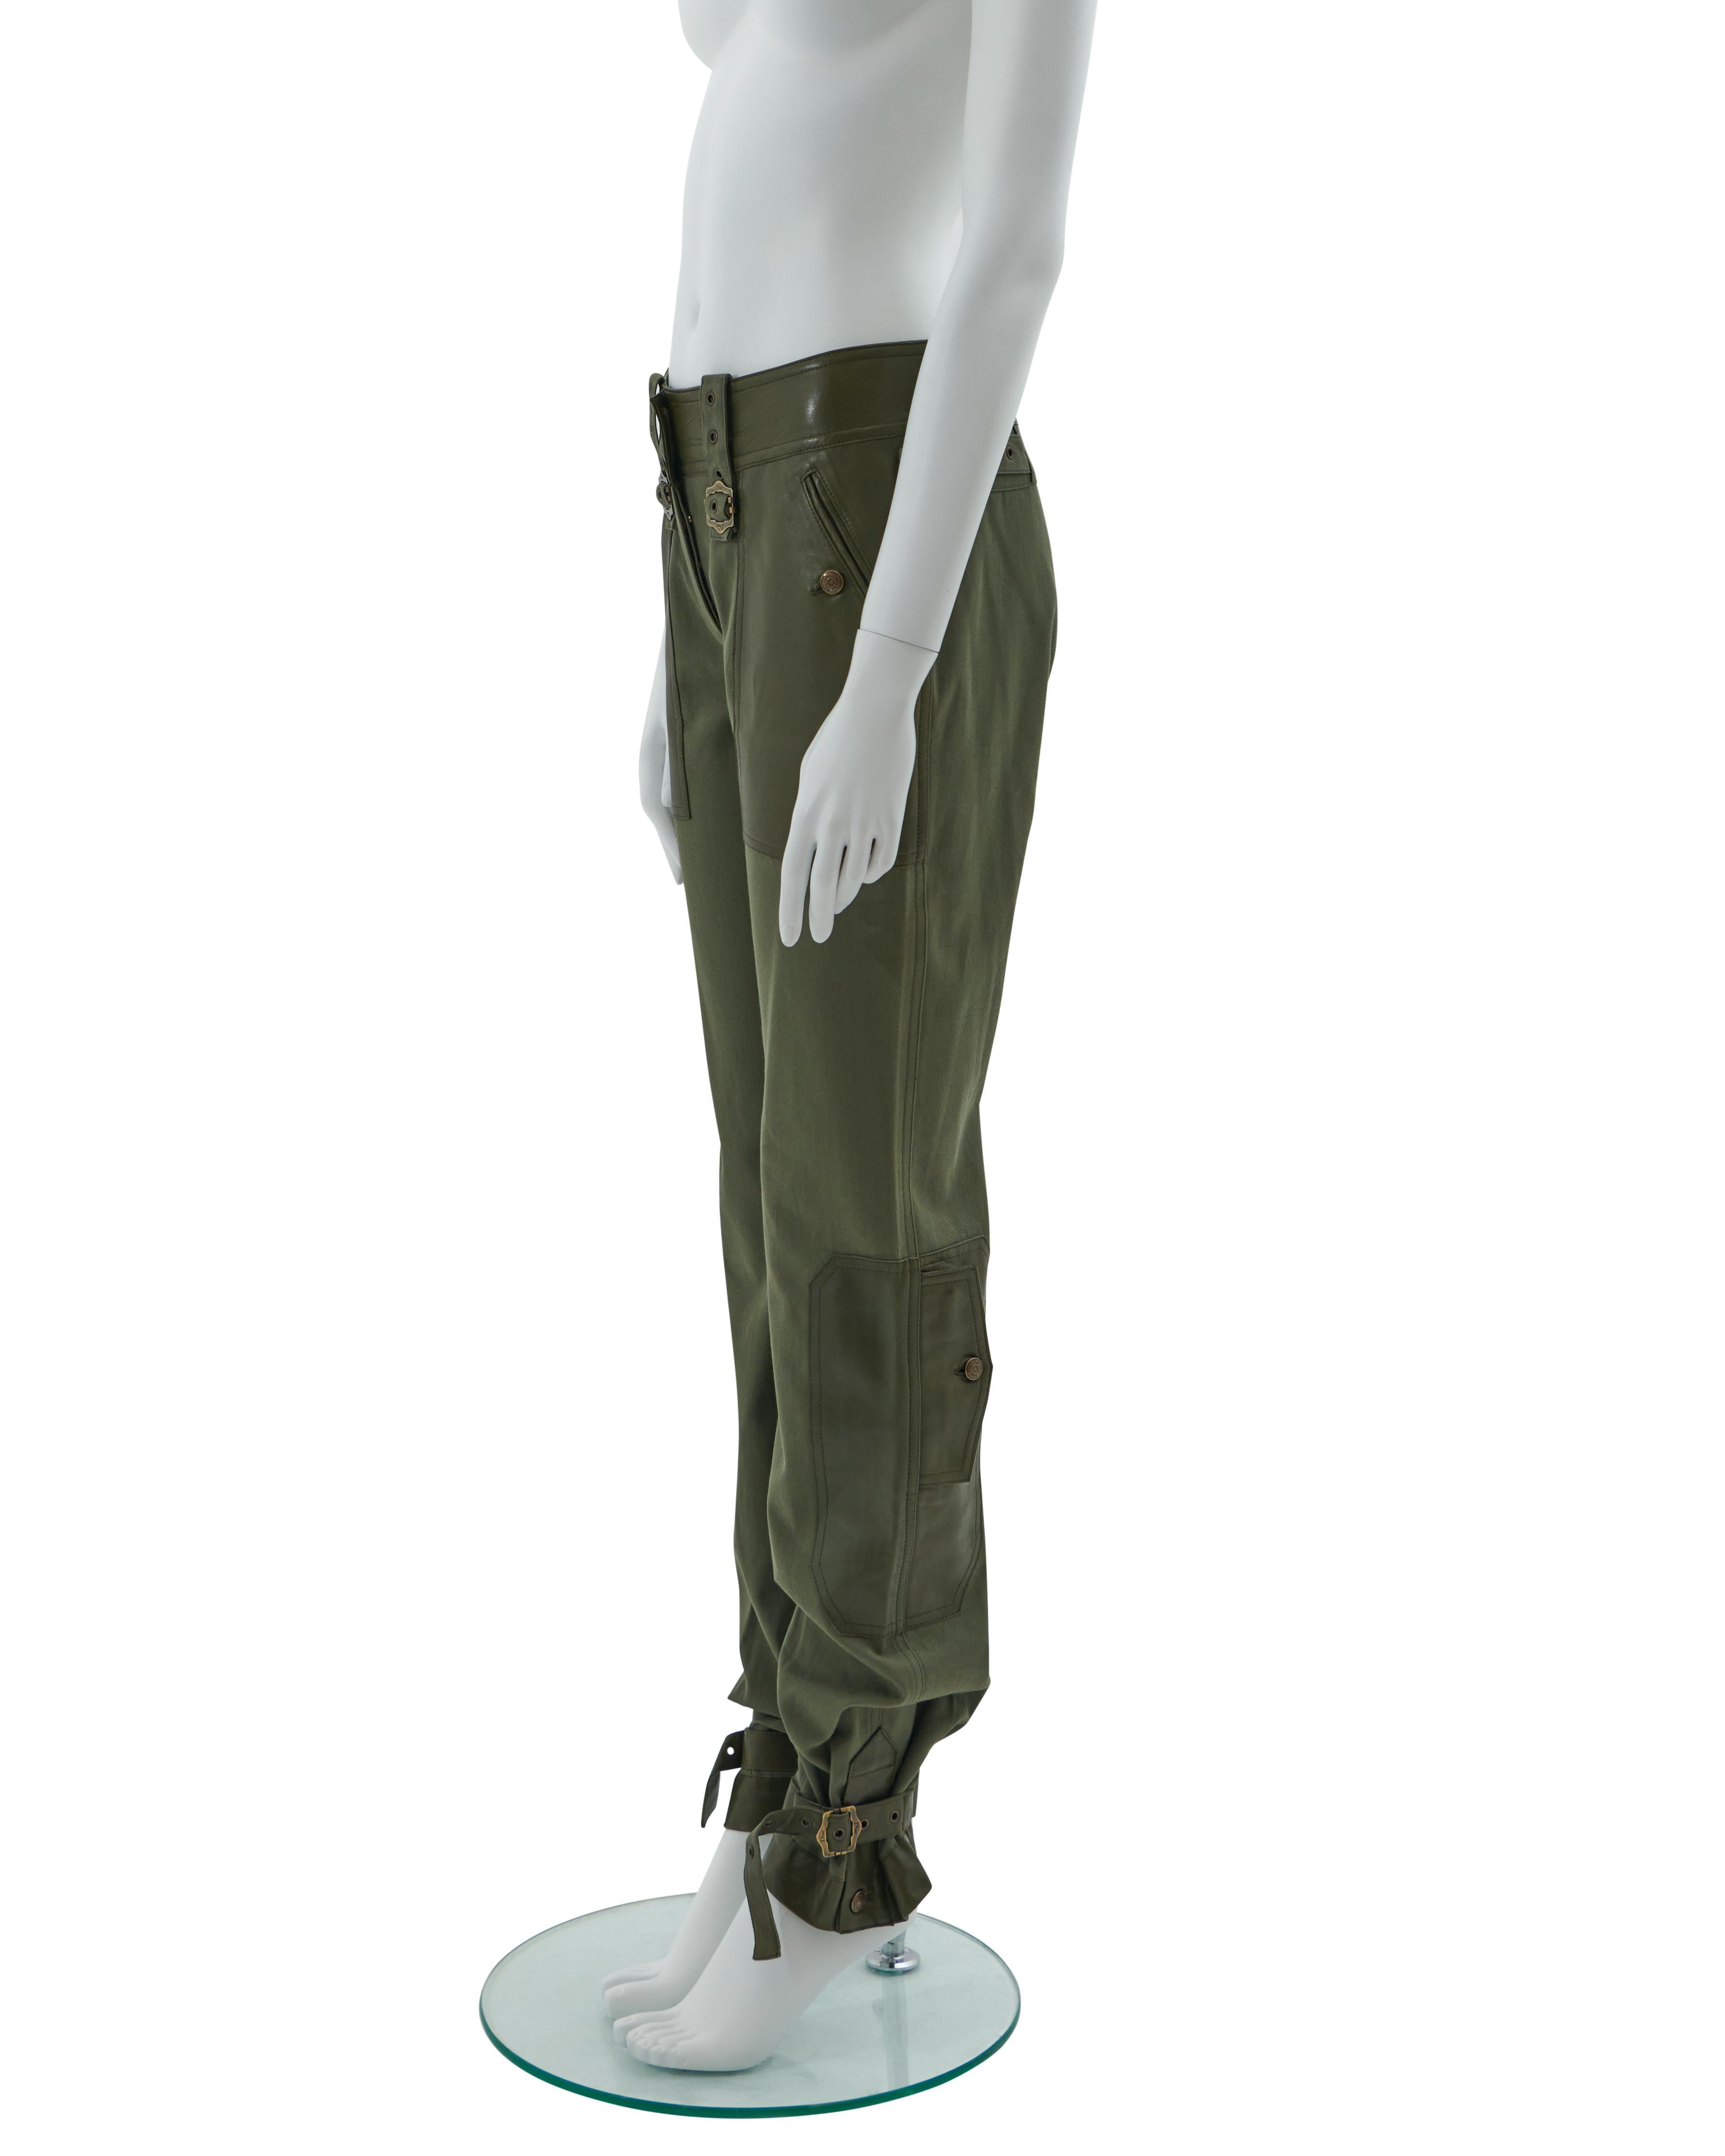 - Designed by John Galliano
- Sold by Skof.Archive
- Khaki olive green cotton canvas and leather cargo pants
- Leg embellished with pin buckles in coordinated leather and aged gold-tone metal
- Adjustable buckles on the button
- Two frontal leather